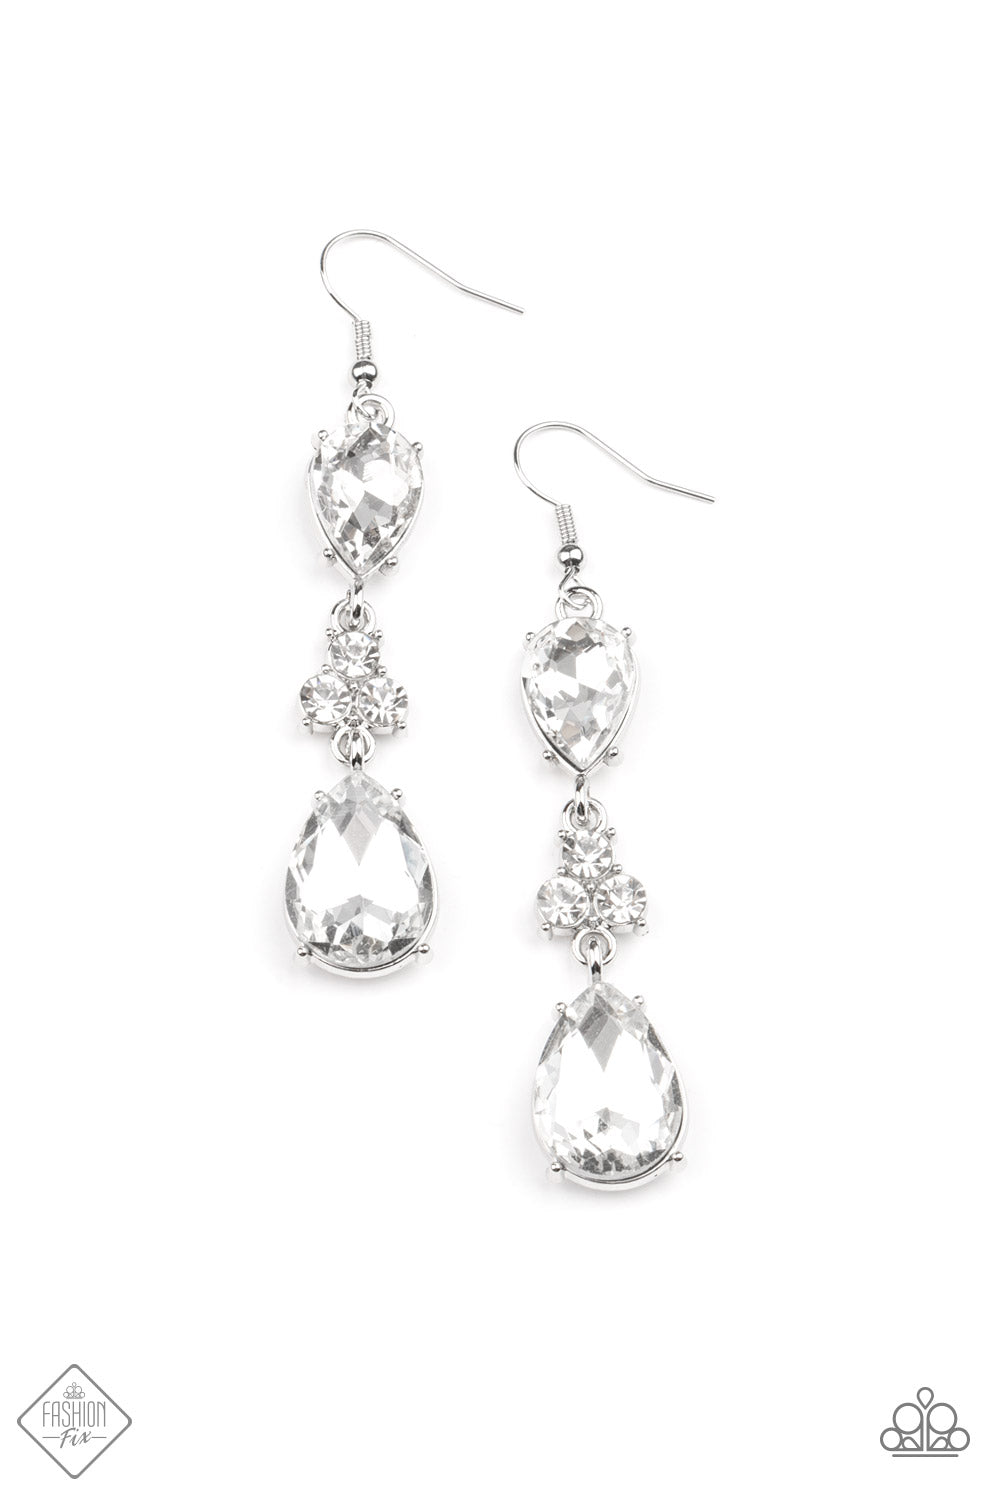 PAPARAZZI - ONCE UPON A TWiNKLE -  A trio of dazzling white rhinestones unites two white teardrop gems as they dangle brilliantly from the ear for a flawless finish. Earring attaches to a standard fishhook fitting.